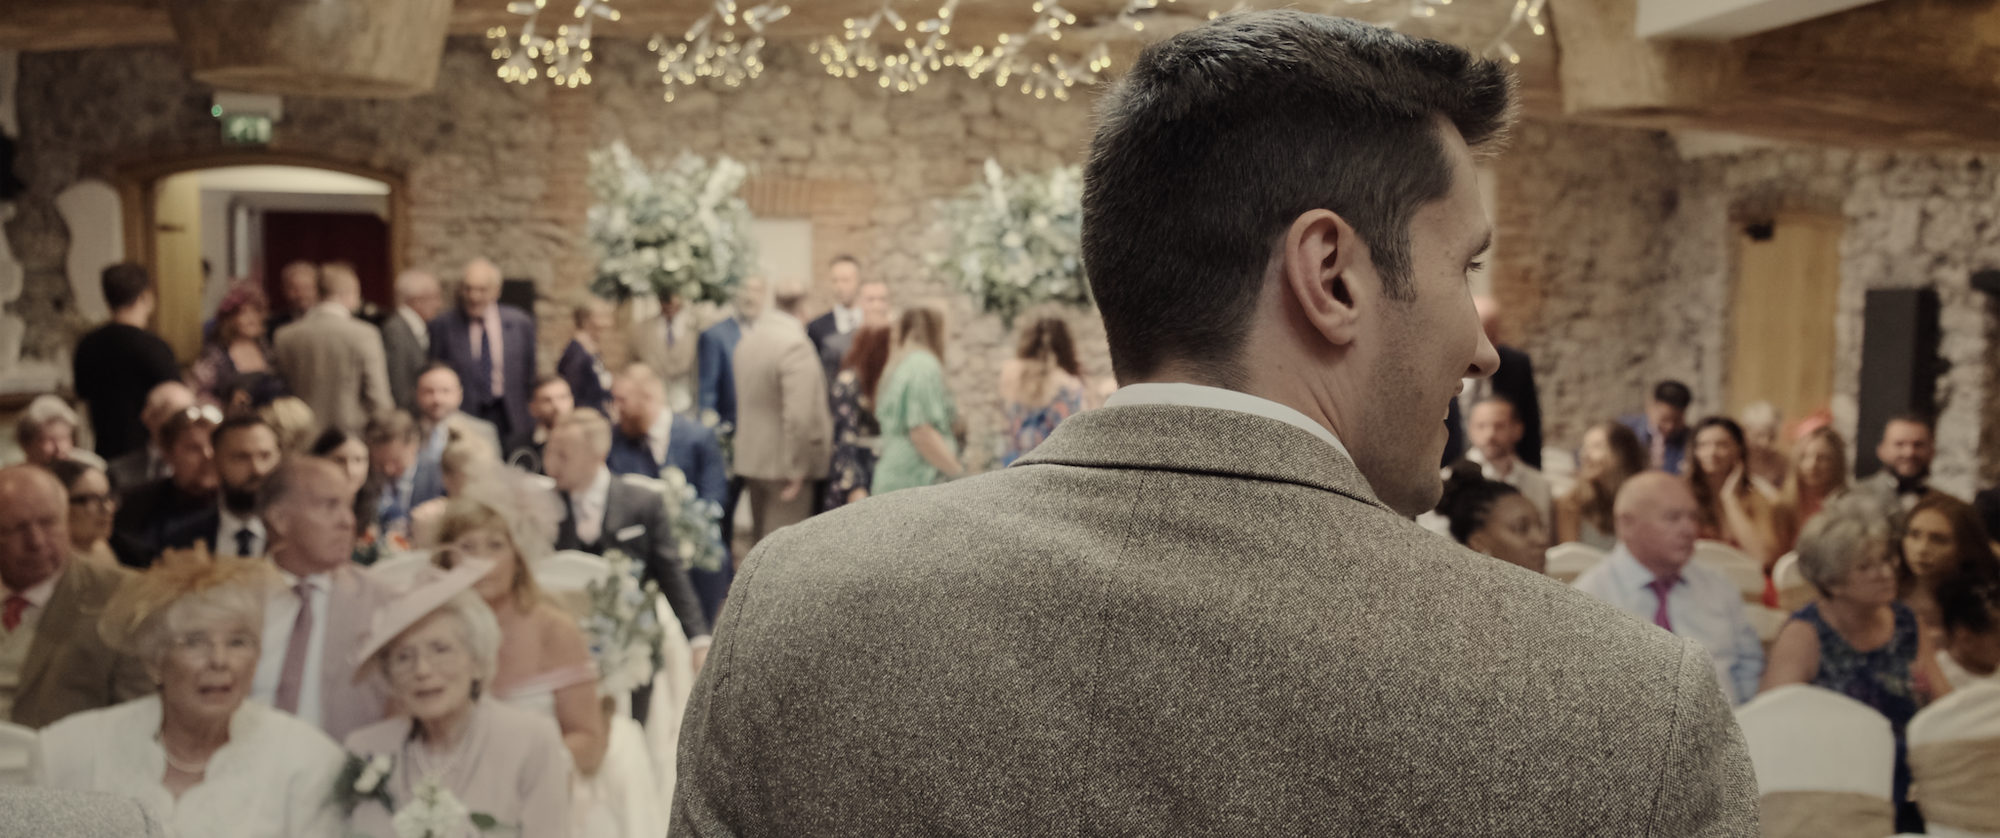 Oxwich Bay Hotel Wedding Videography by Ben Holbrook Films (Swansea South Wales).jpeg15.png